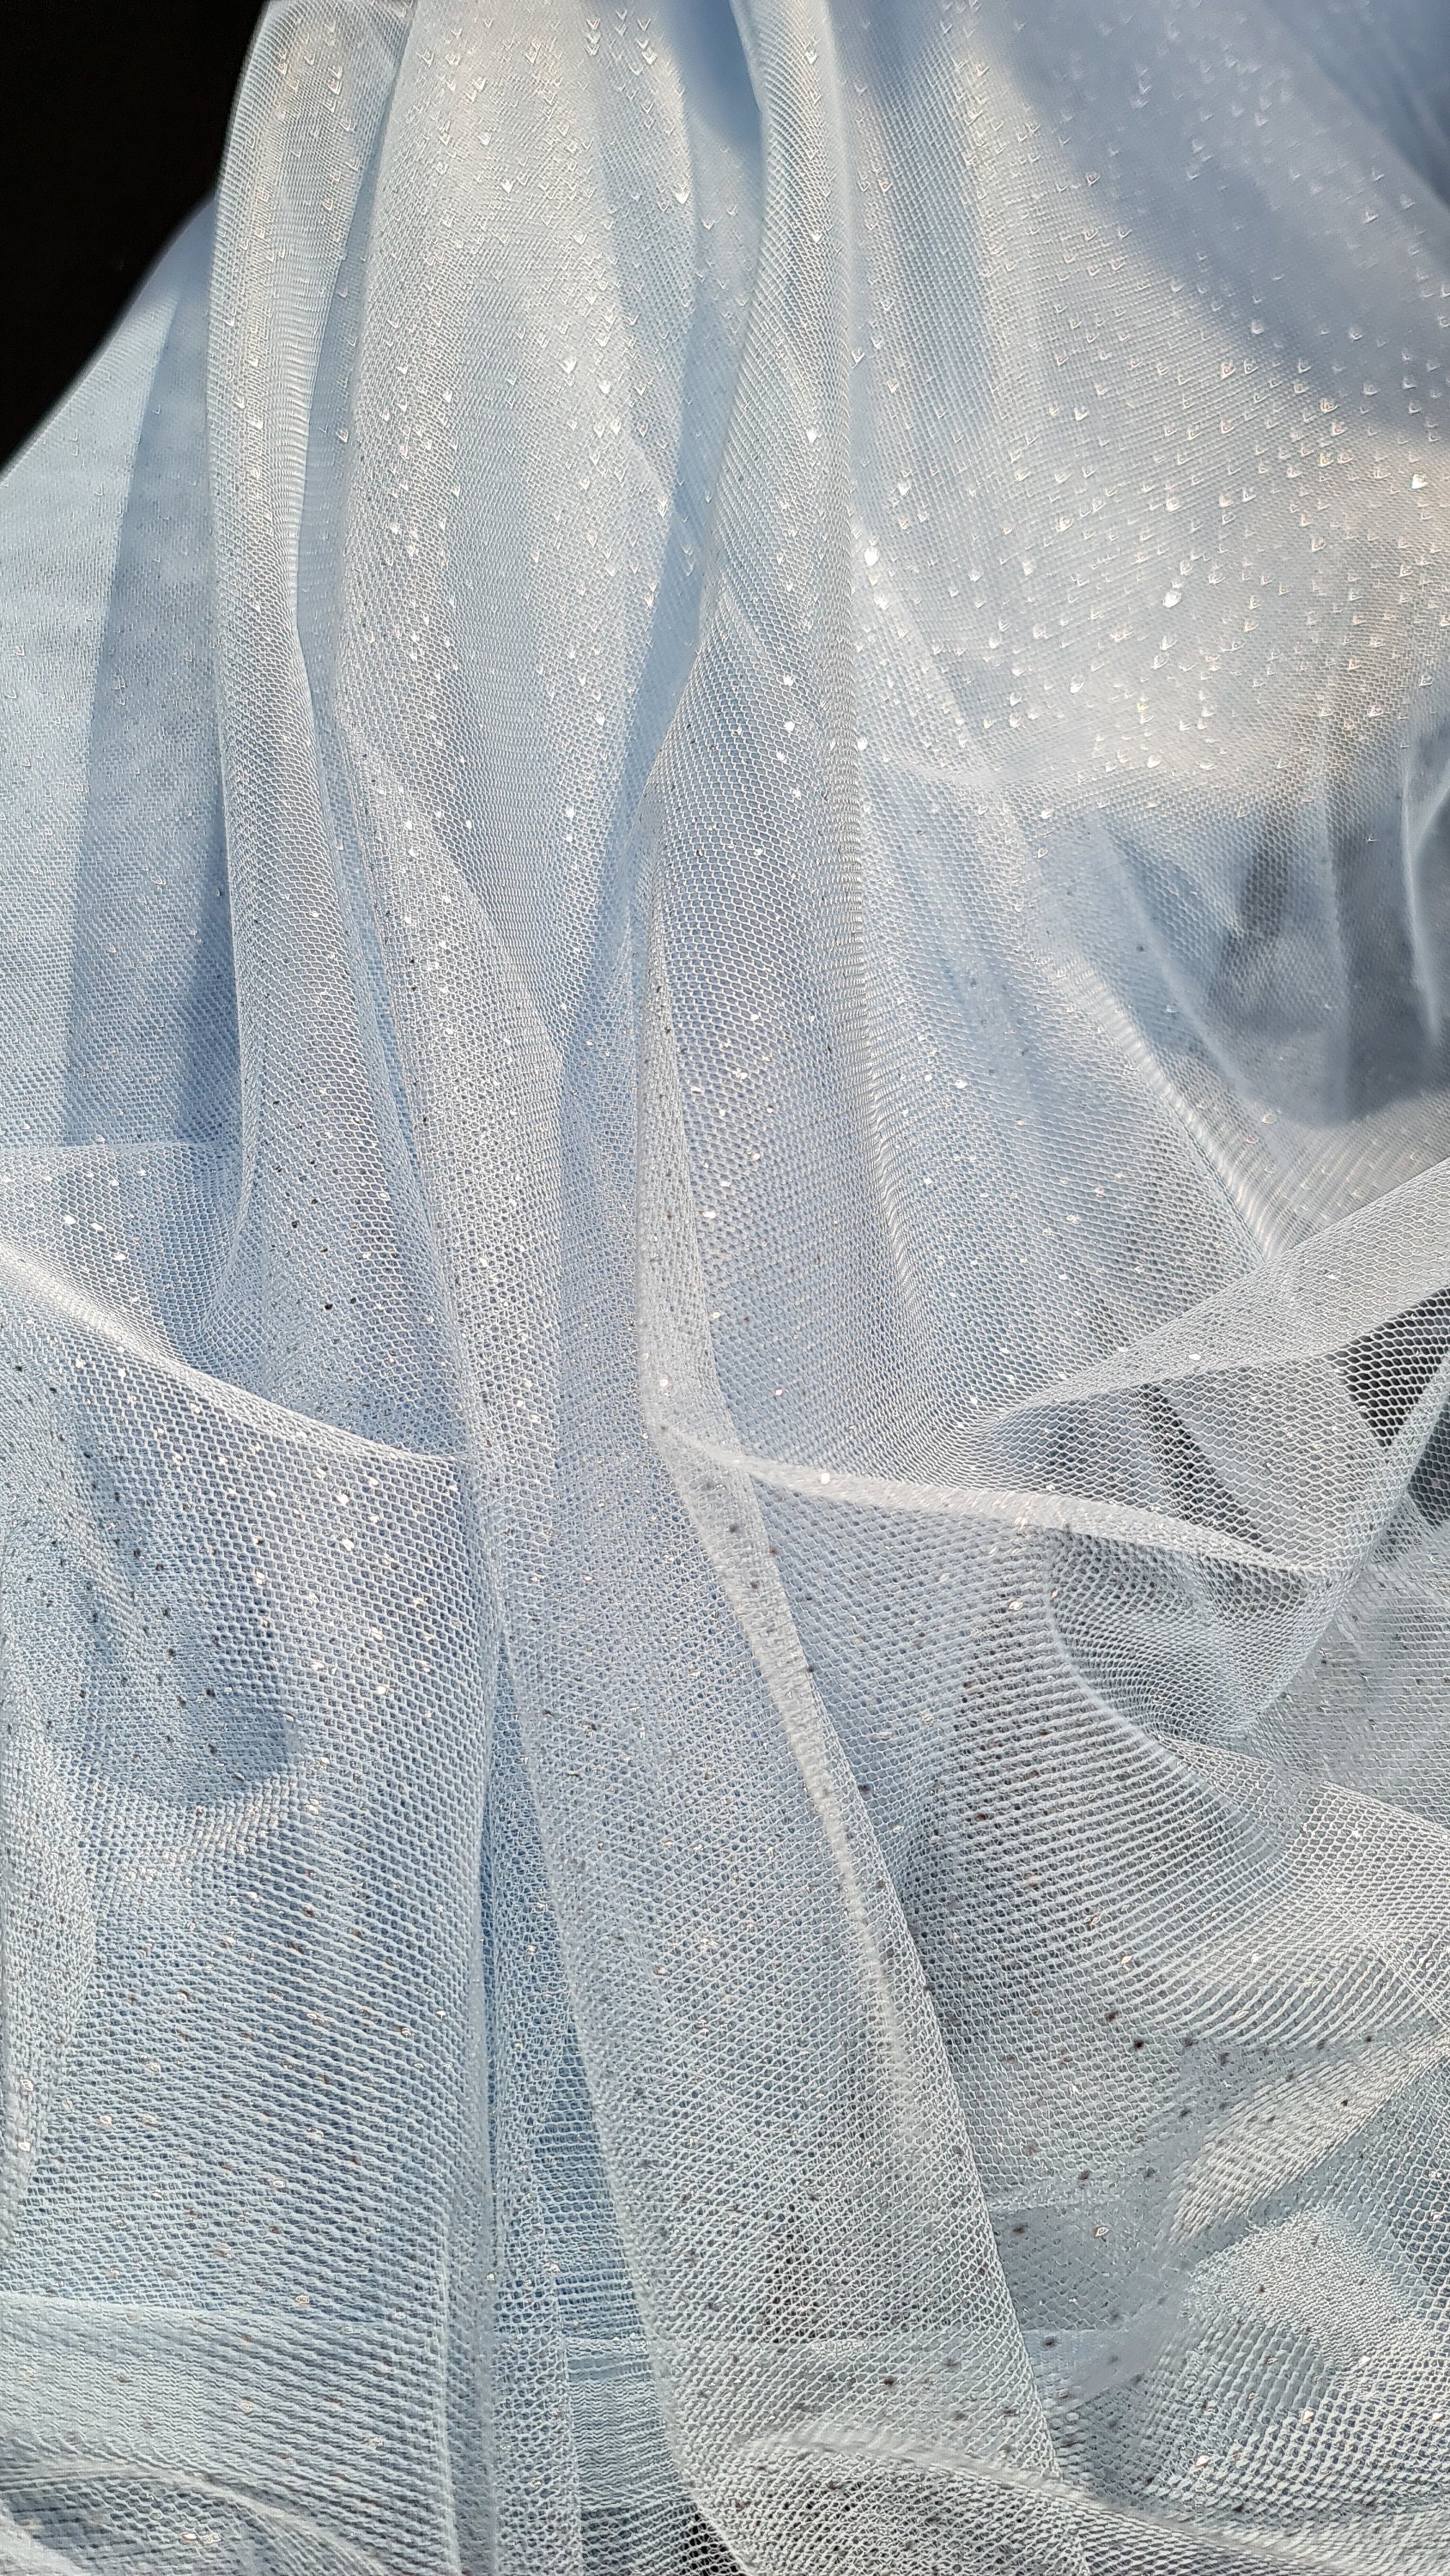 Pale Blue Tulle Fabric, Tulle Lace Fabric, Mesh Fabric, Gauze